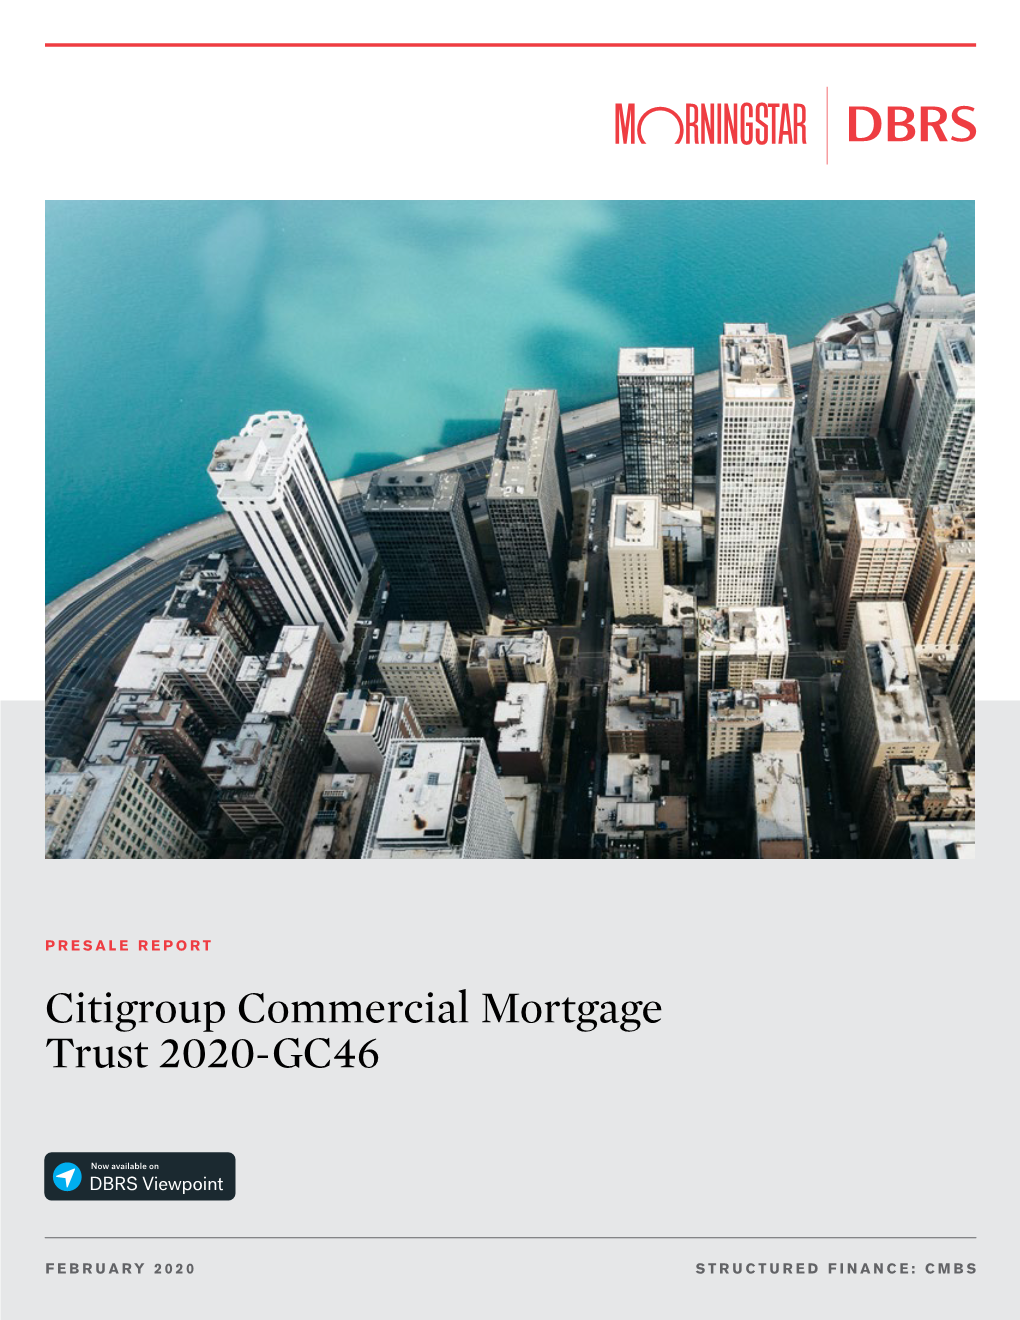 Citigroup Commercial Mortgage Trust 2020-GC46